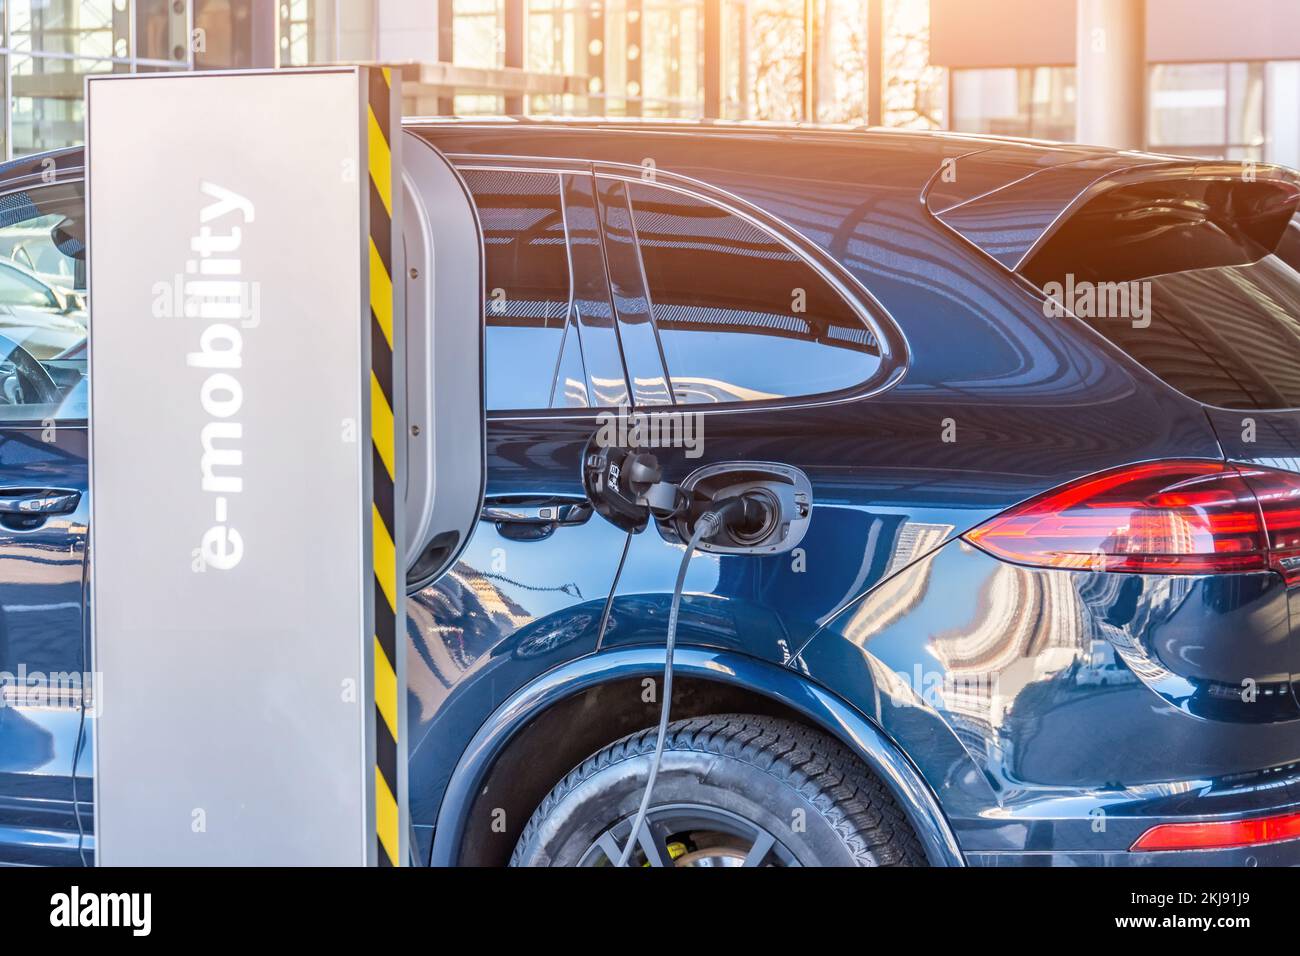 Charging the machine, compartment door is open, the electric plug under voltage restores the battery charge. Refueling for electric cars e-mobility Stock Photo